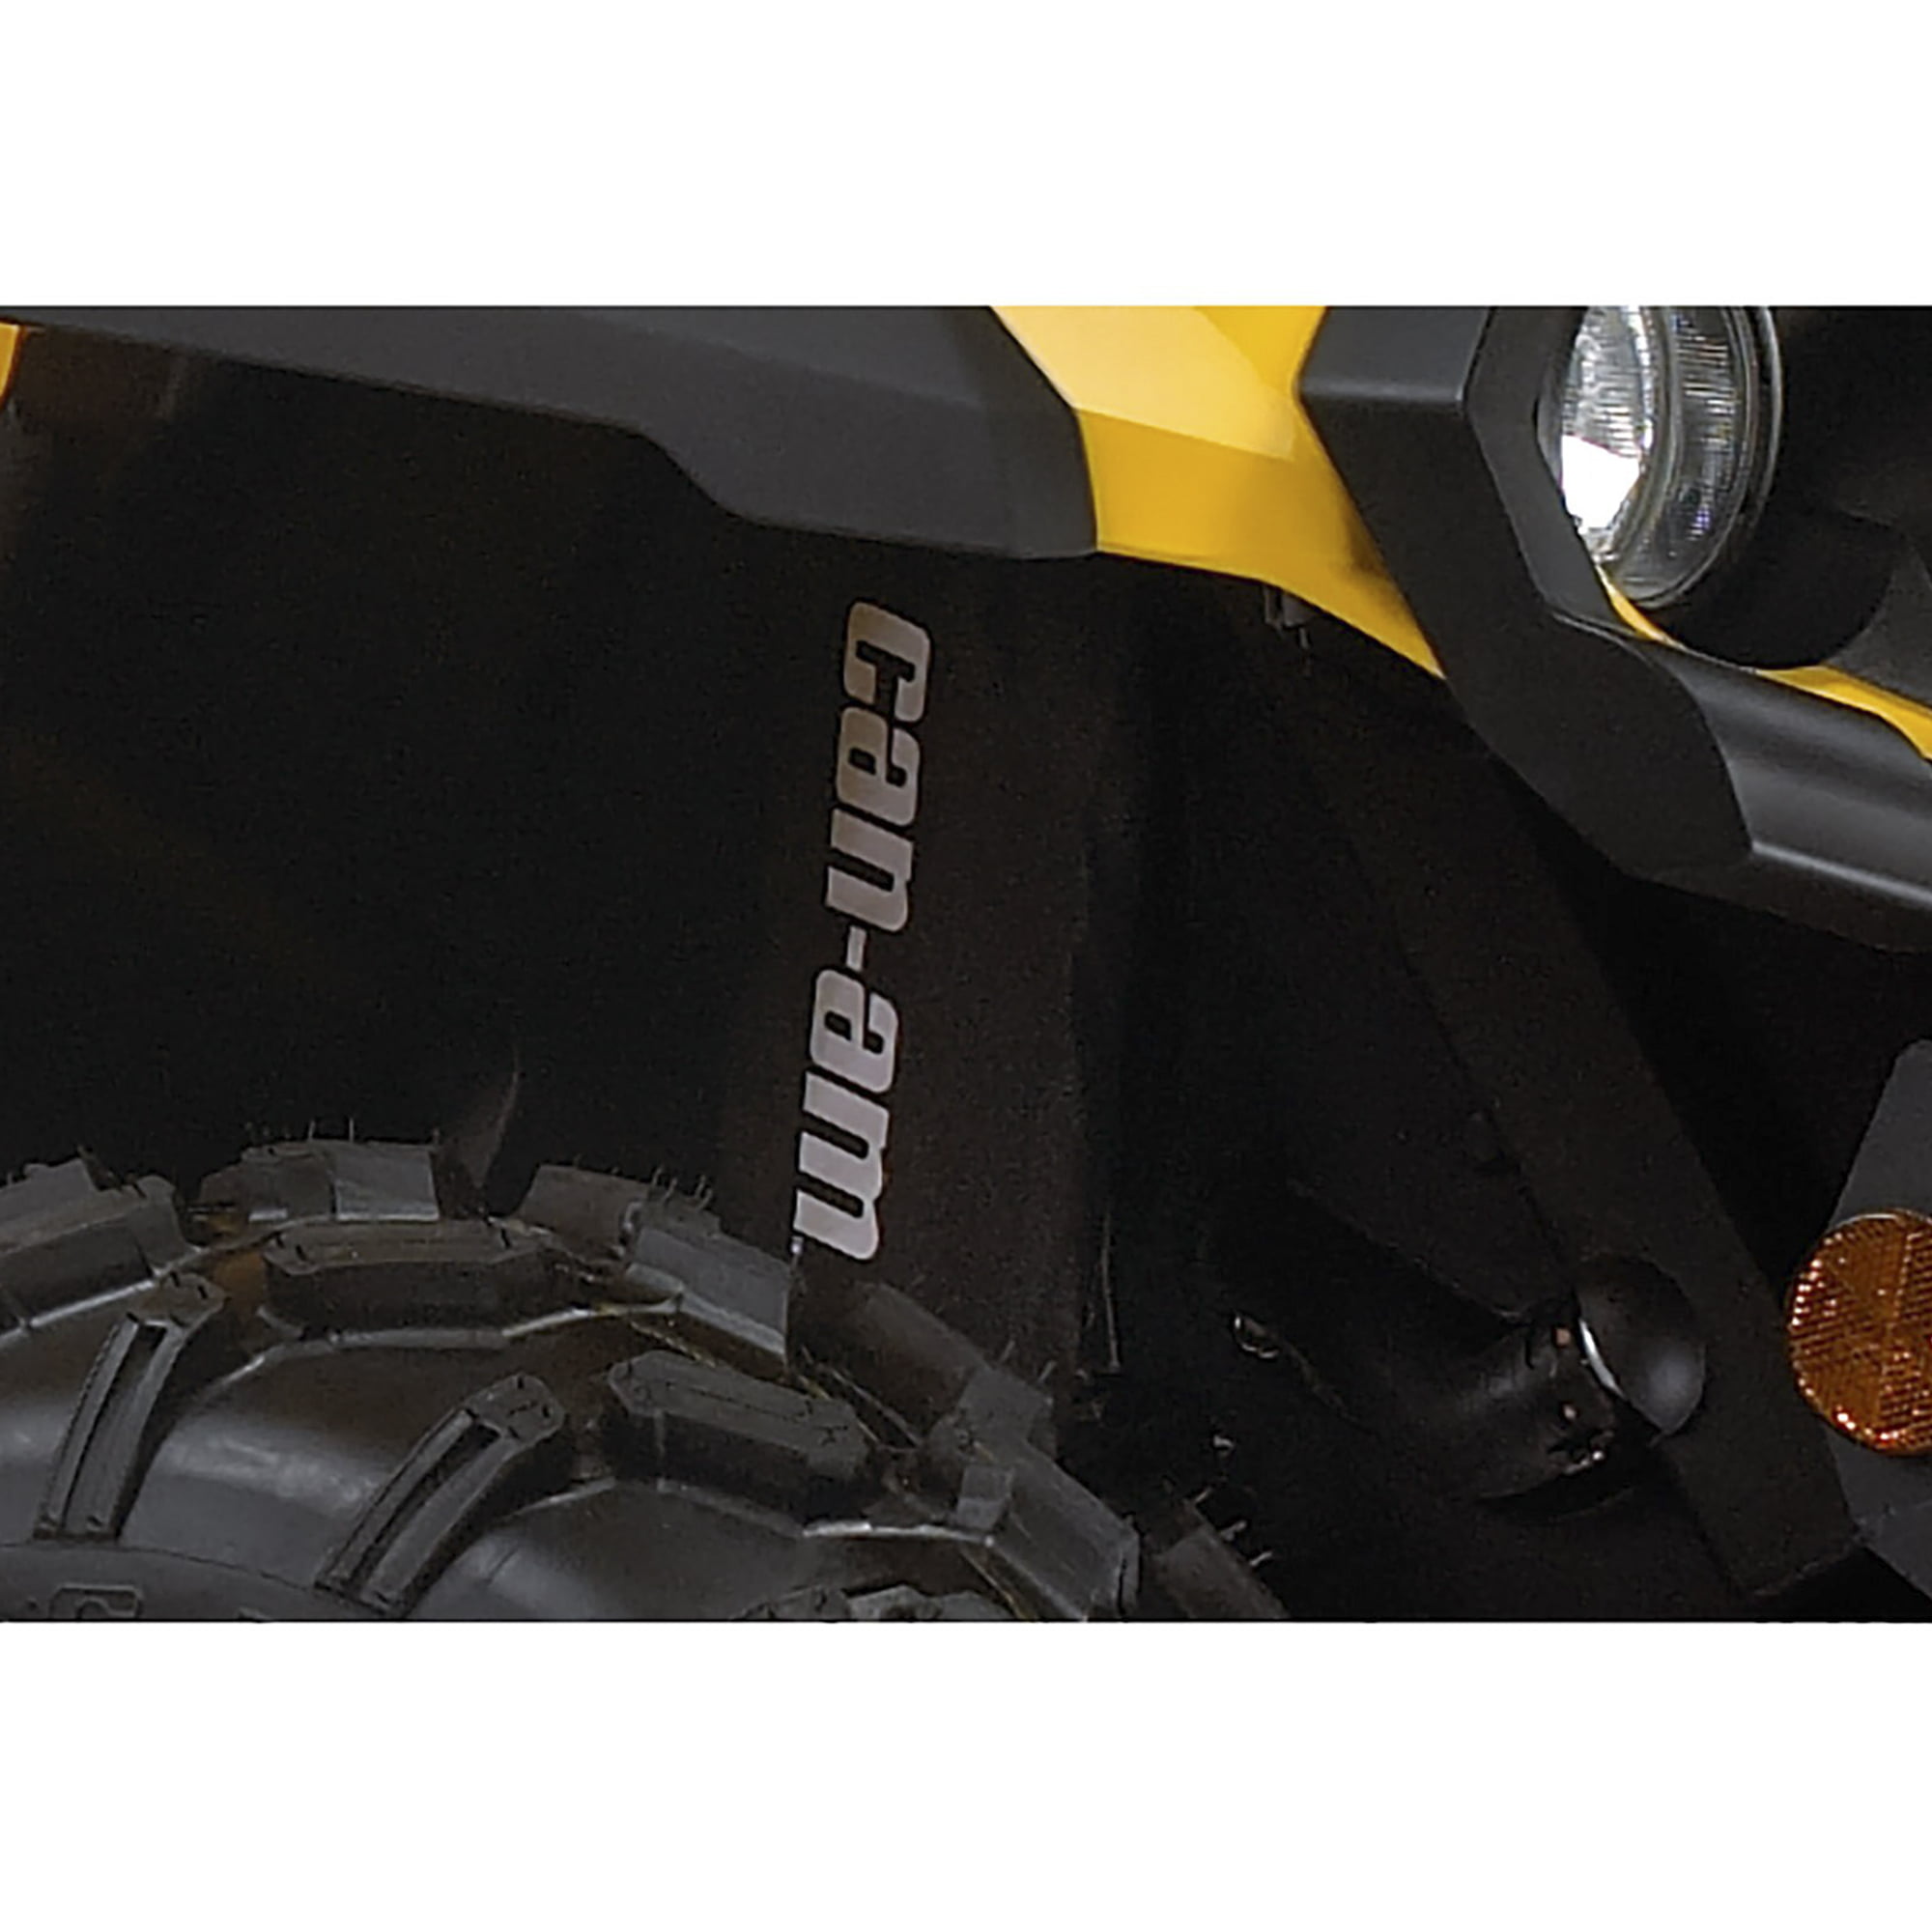 Shock CoverS CAN-AM RENEGADE BRP SET 4 800 1000 